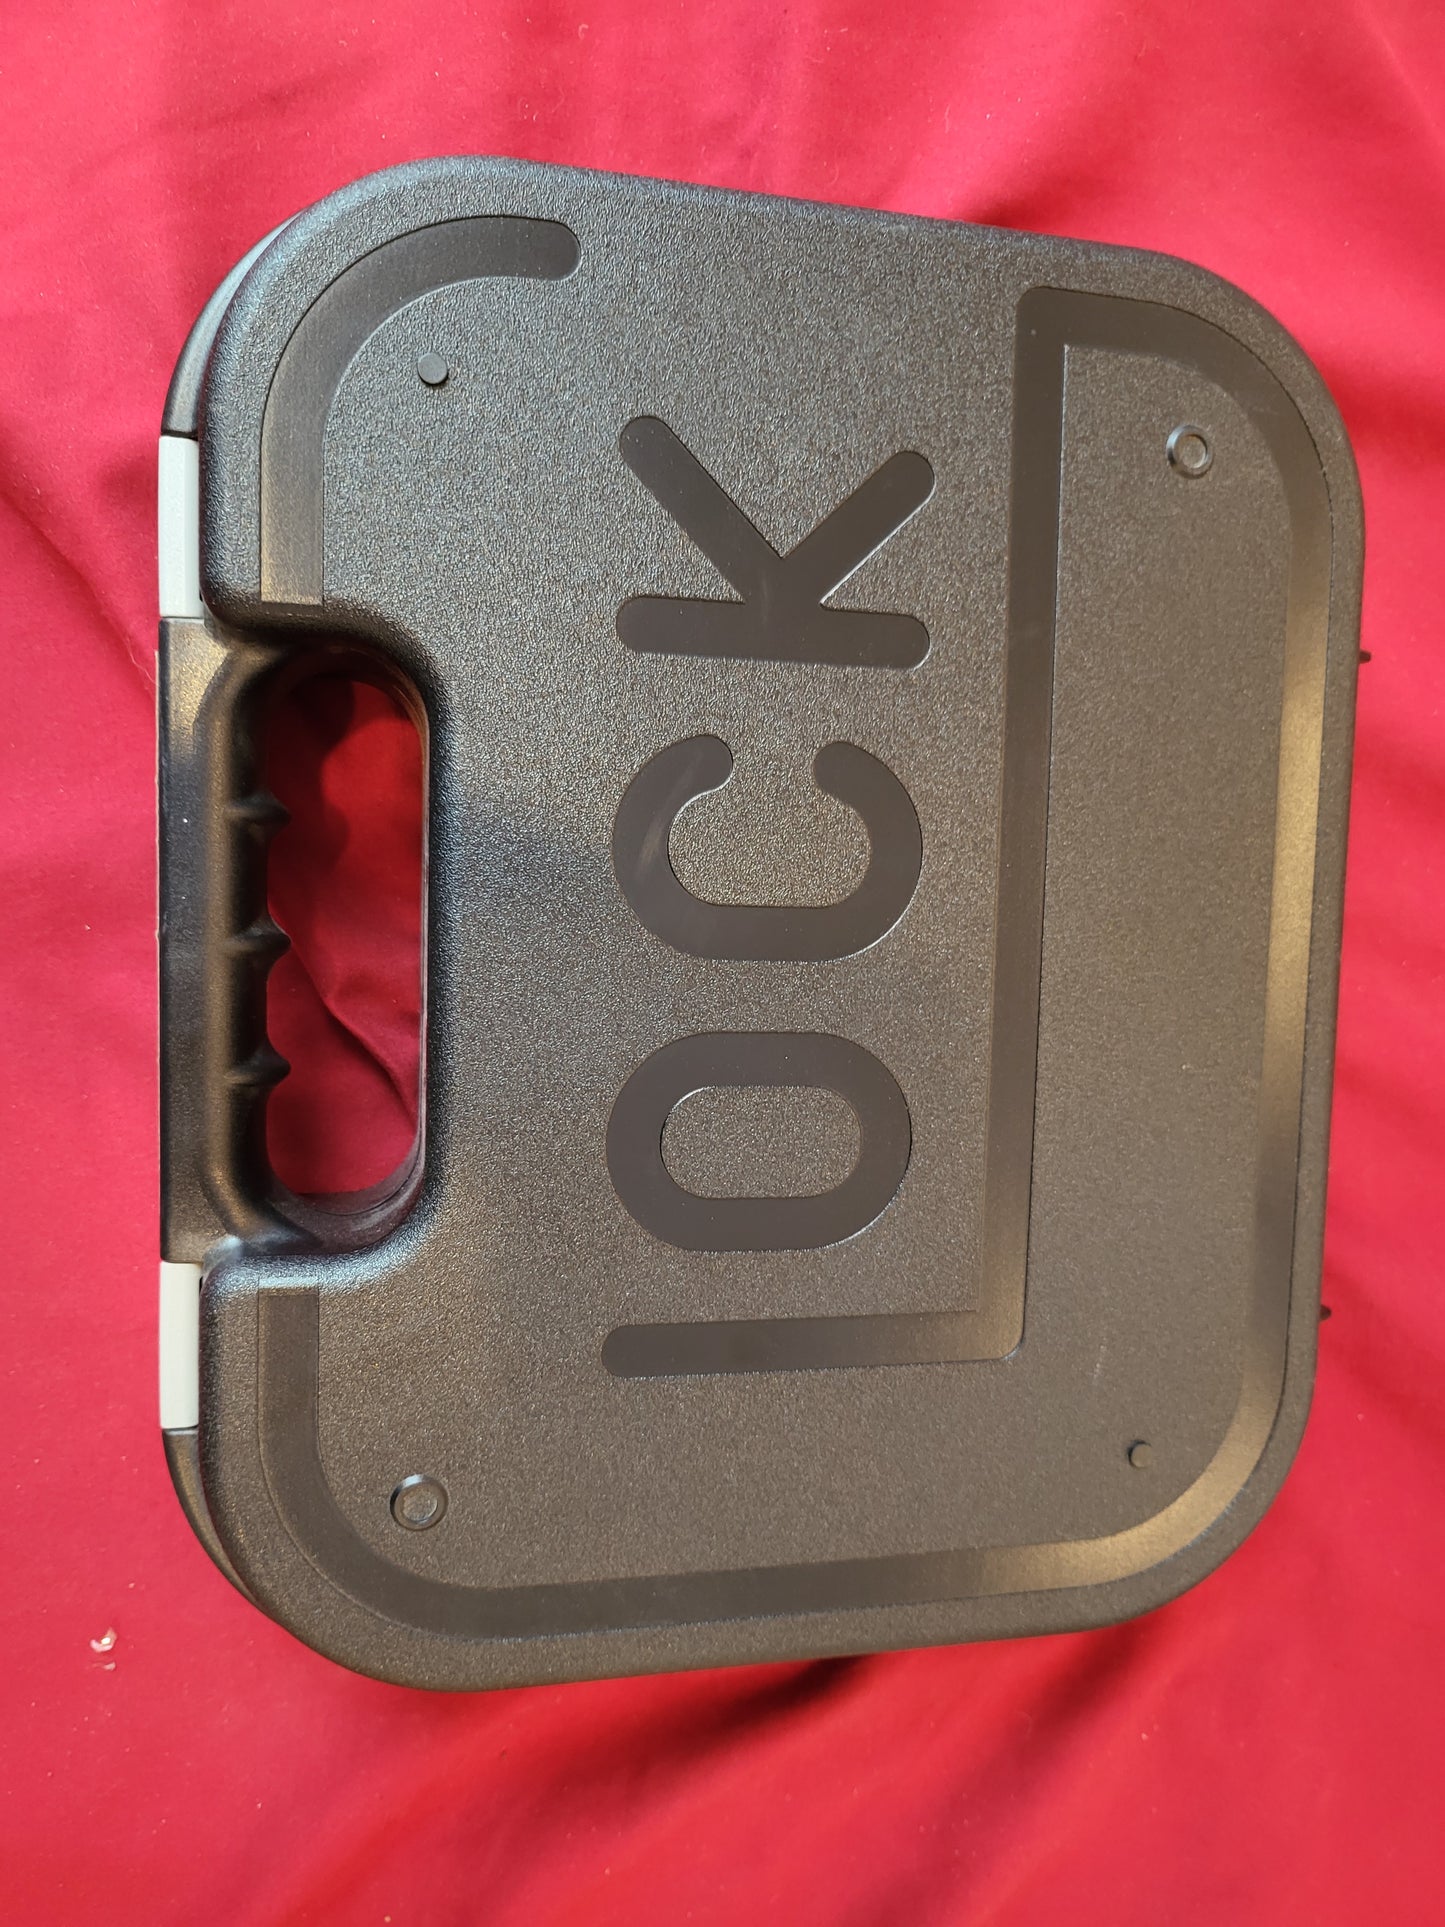 GLOCK 29 G29 Gen3 SF10mm Sub-Compact 10-Round Pistol 2x10 mags no card fee